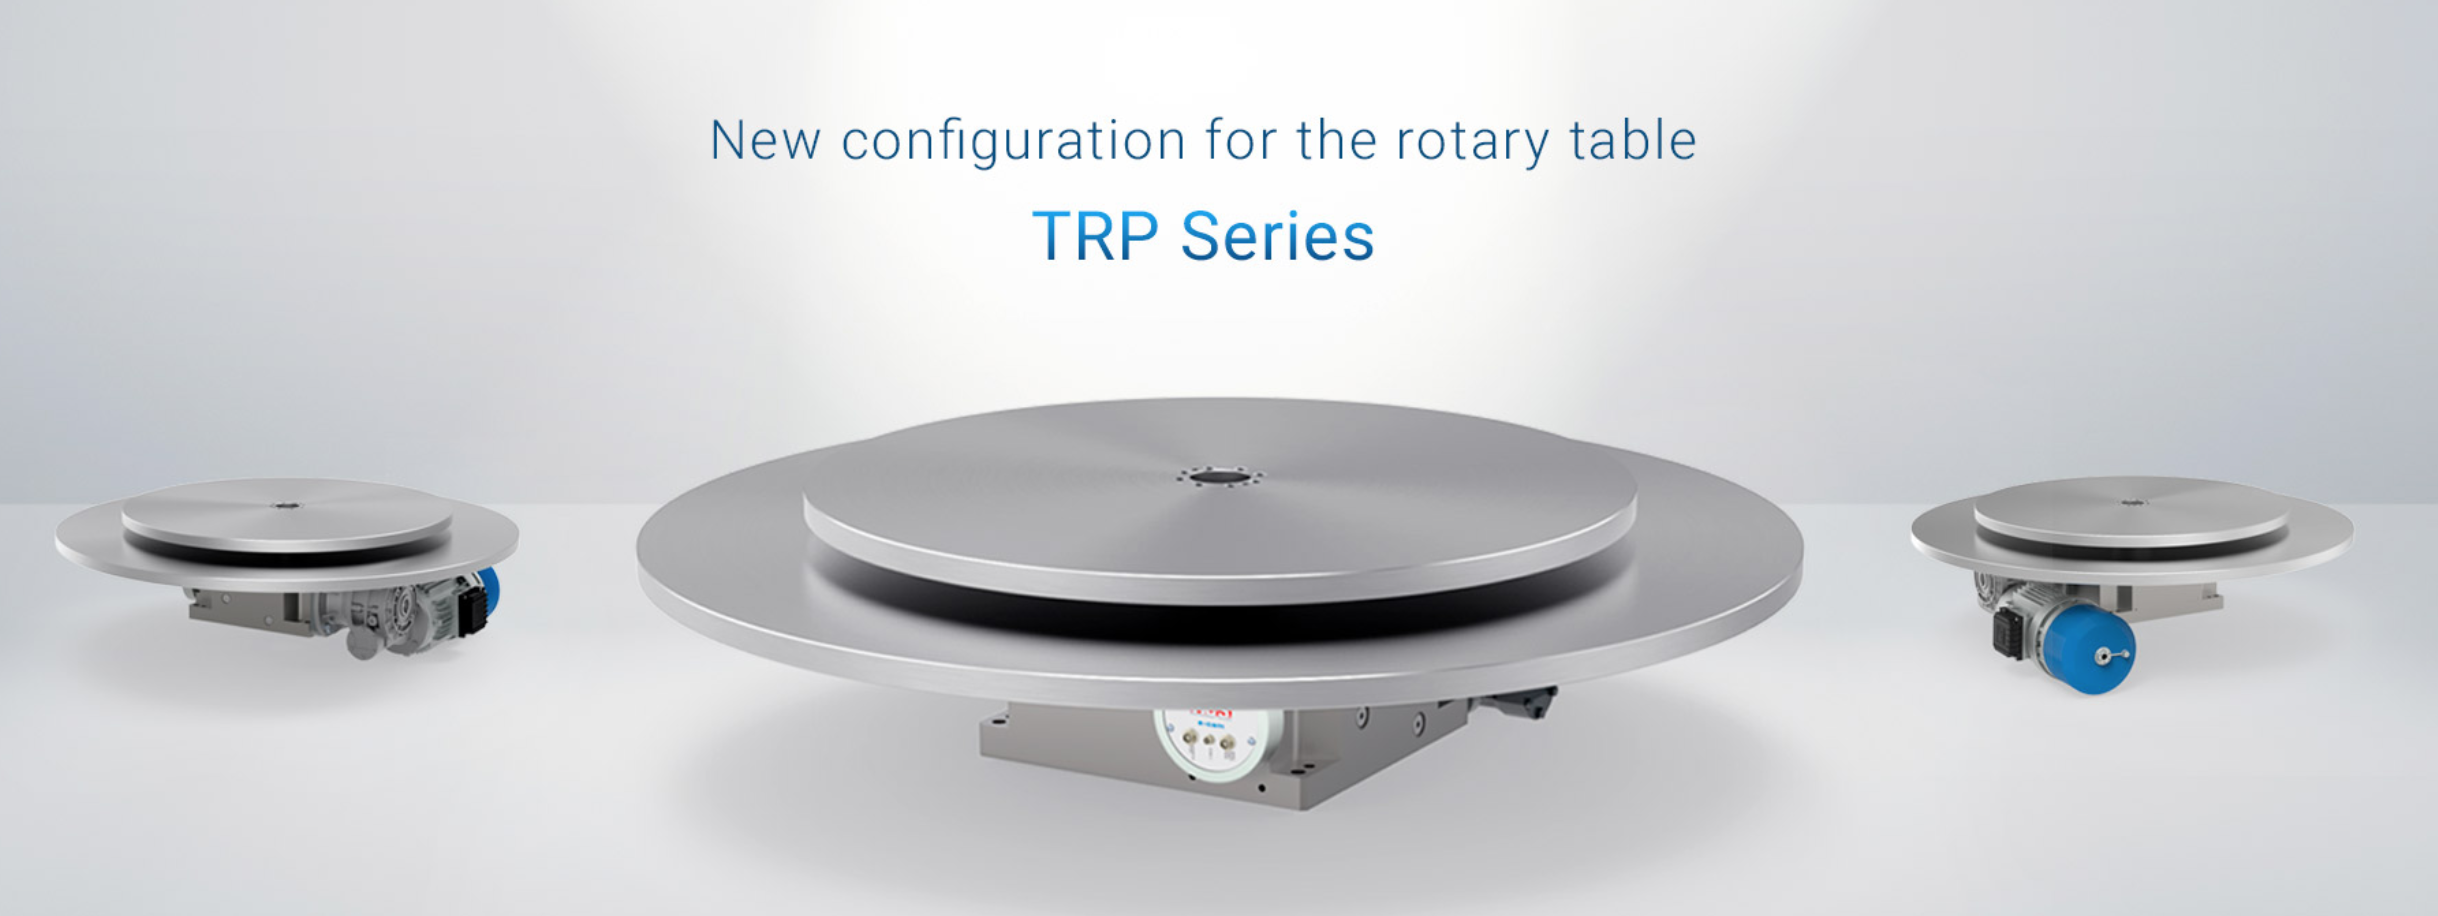 CDS Rotary Table TRP Series